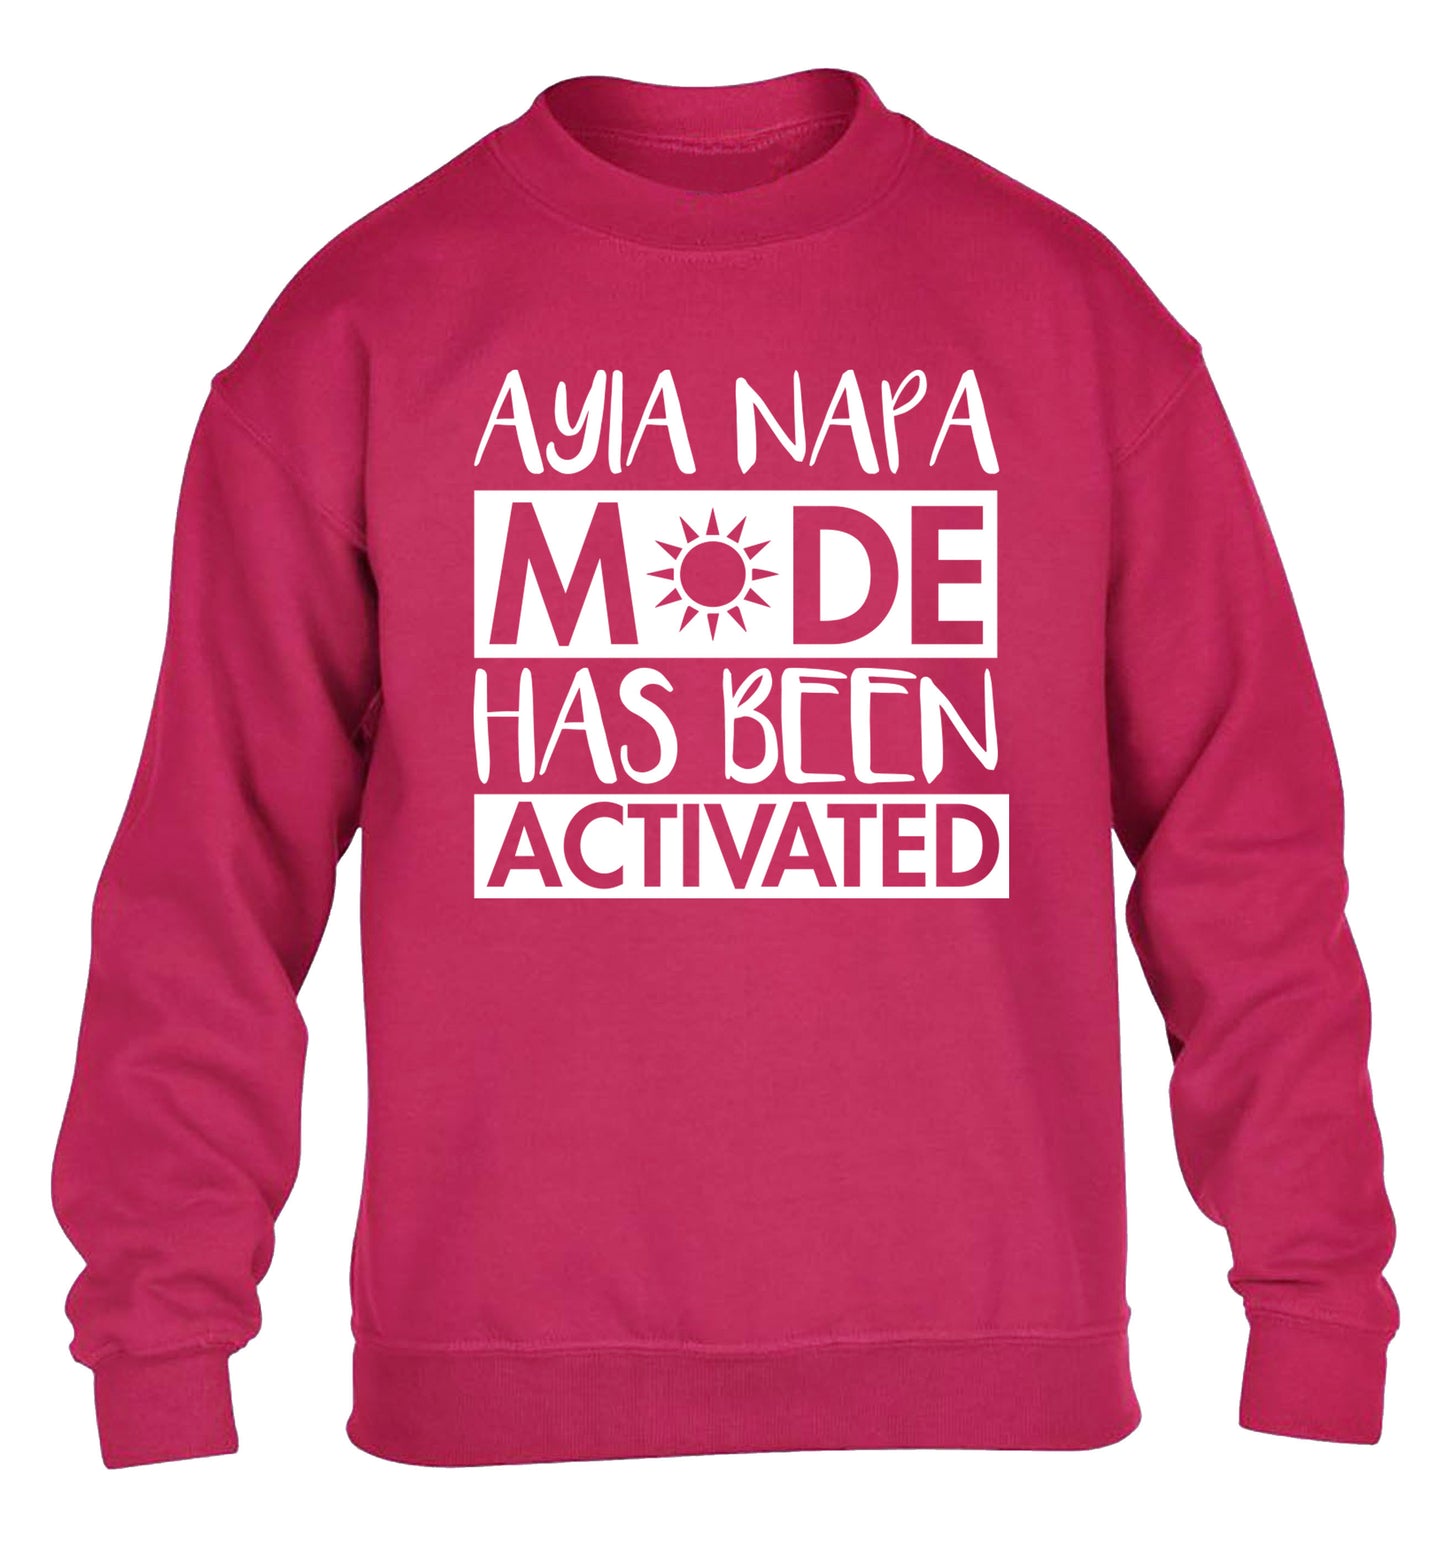 Aiya Napa mode has been activated children's pink sweater 12-14 Years